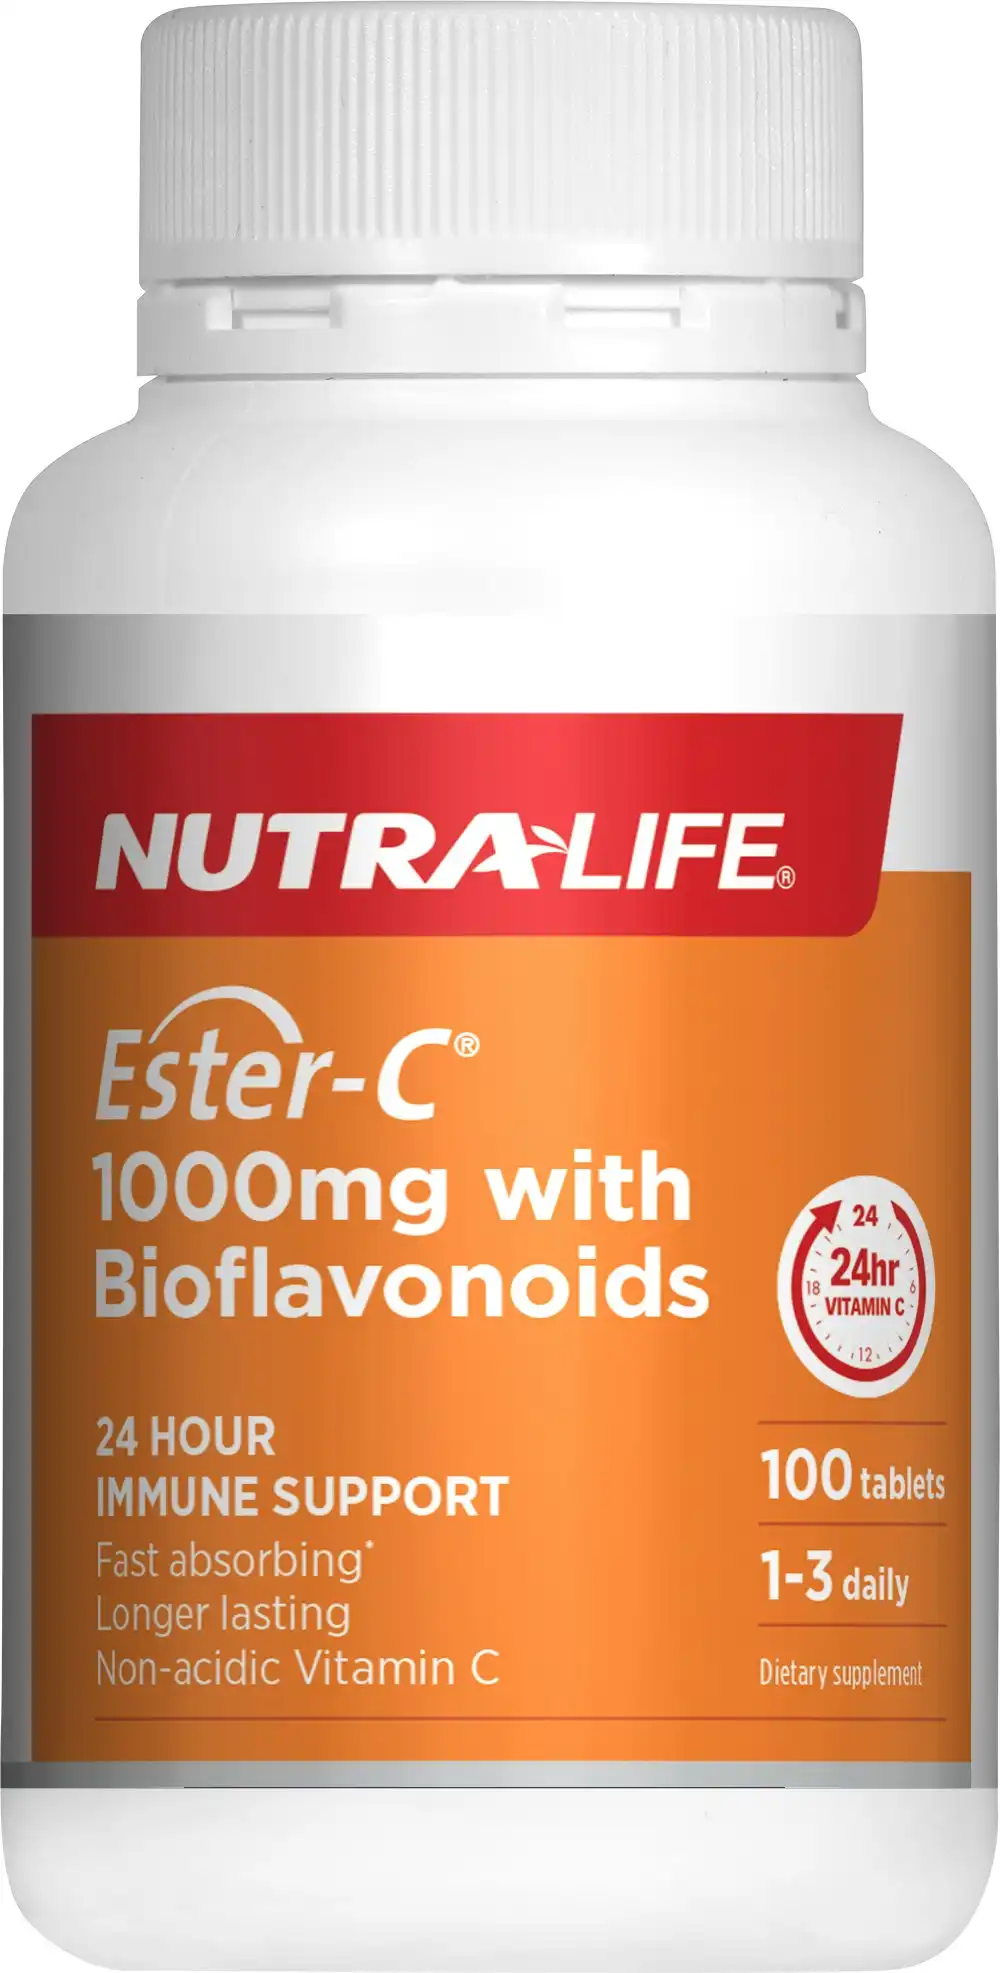 Nutra-Life Ester-C(R) 1000mg + Bioflavonoids 100 Tablets